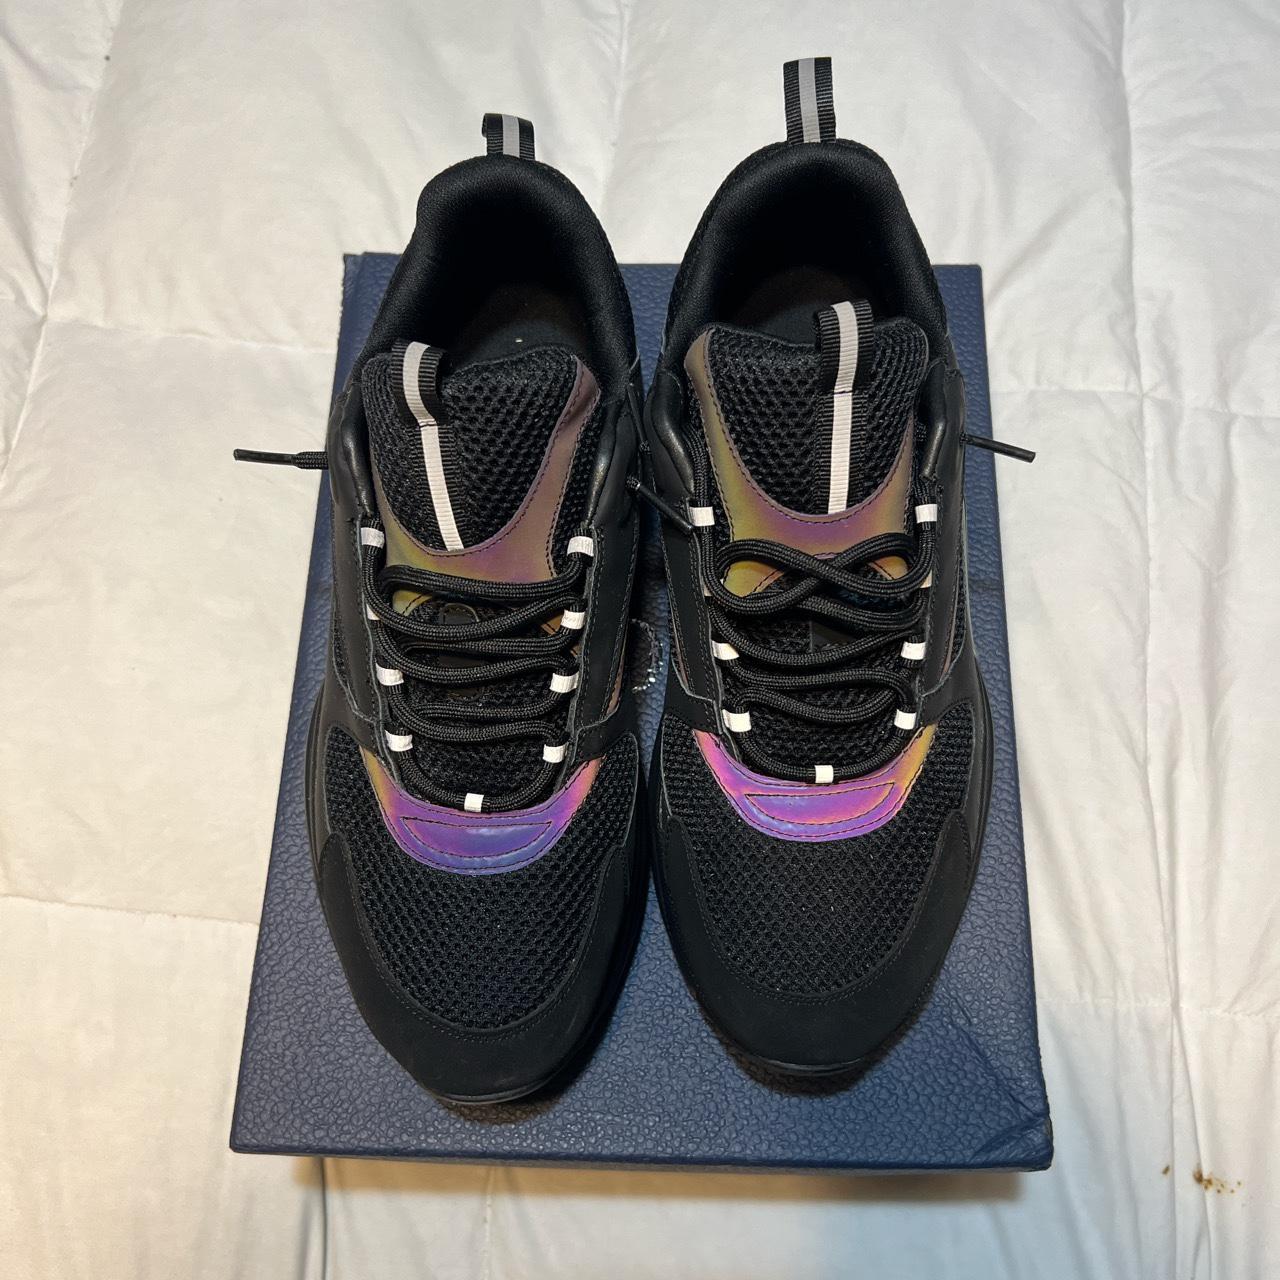 Dior B22 Reflective Trainers Pink